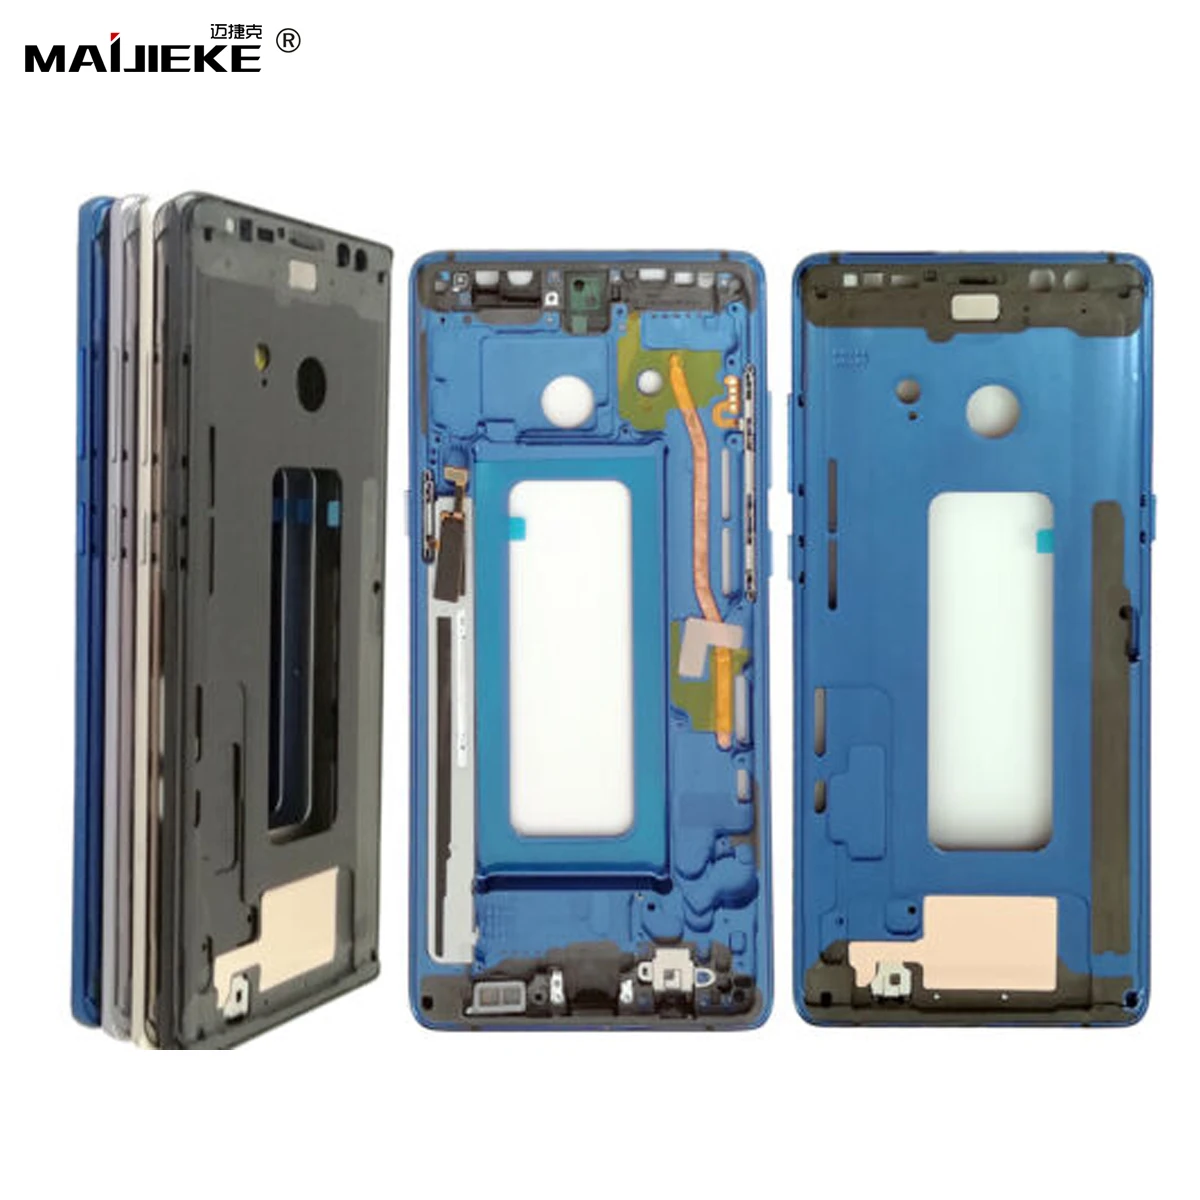 

Screen Mid-Chassis Plate Replacement For Samsung Galaxy Note 8 SM-N950 N950F N950FD Housing Middle Frame Bezel Plate Cover